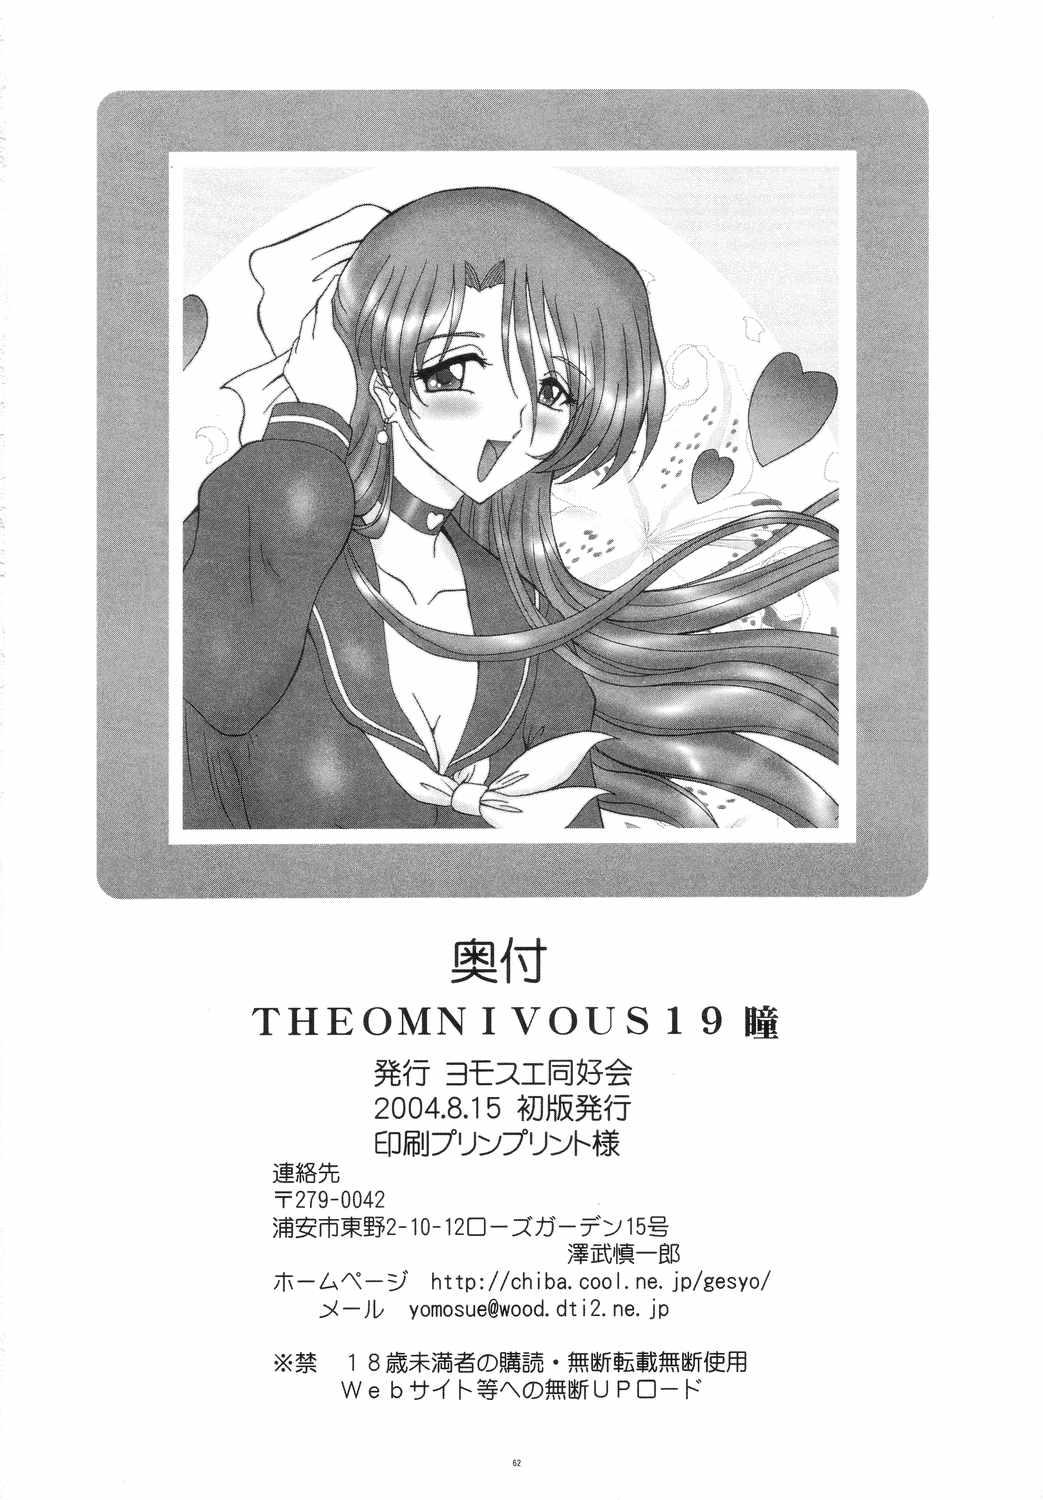 THE OMNIVOUS 19 Hitomi 60